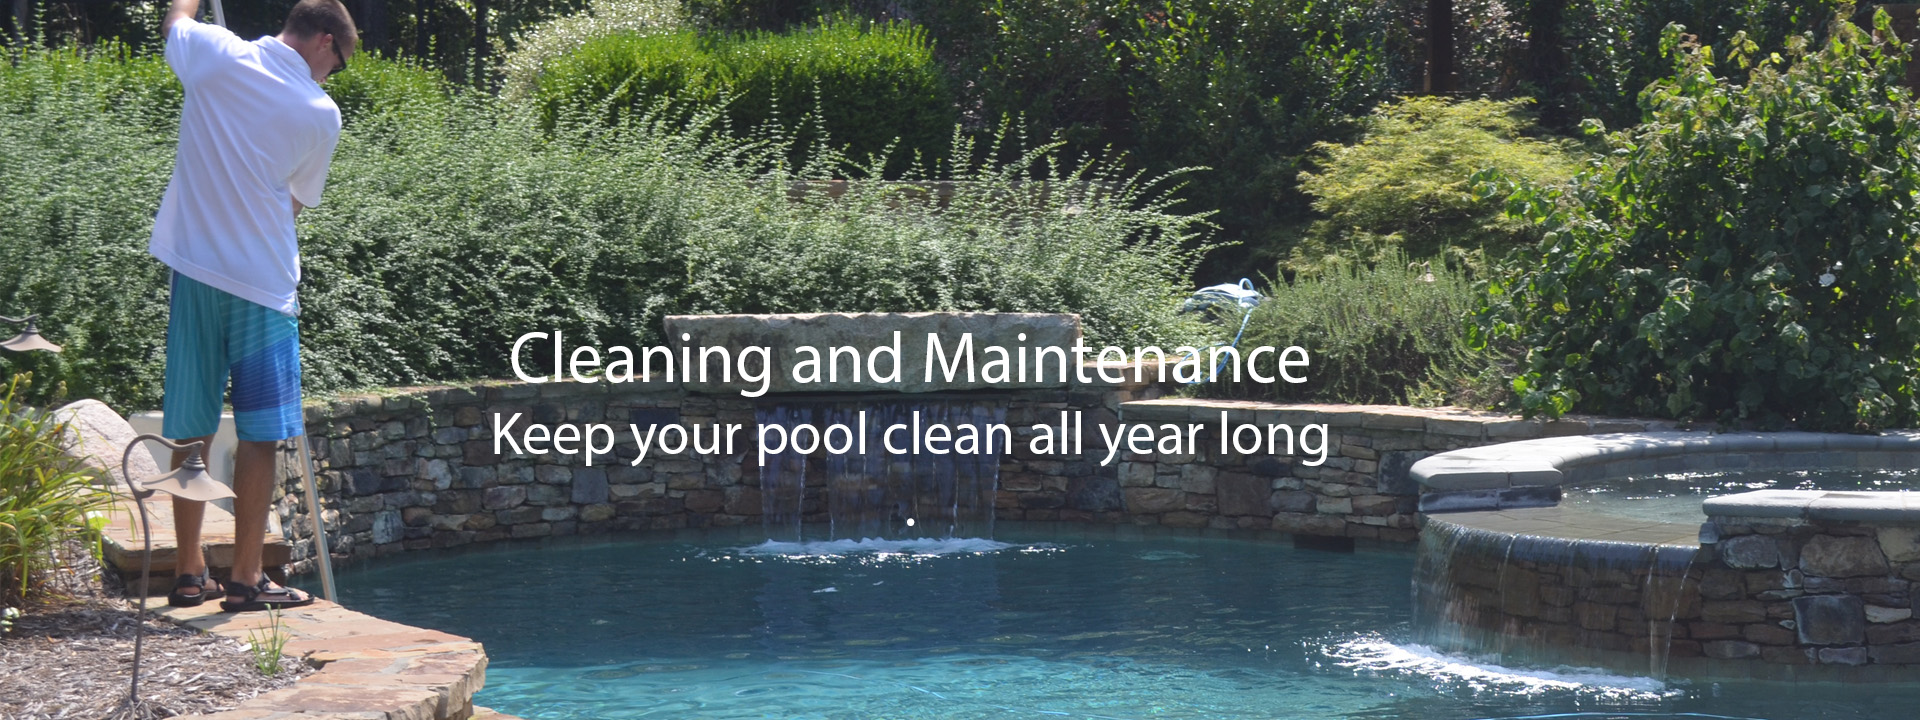 Home pool cleaning service and maintenance for Raleigh